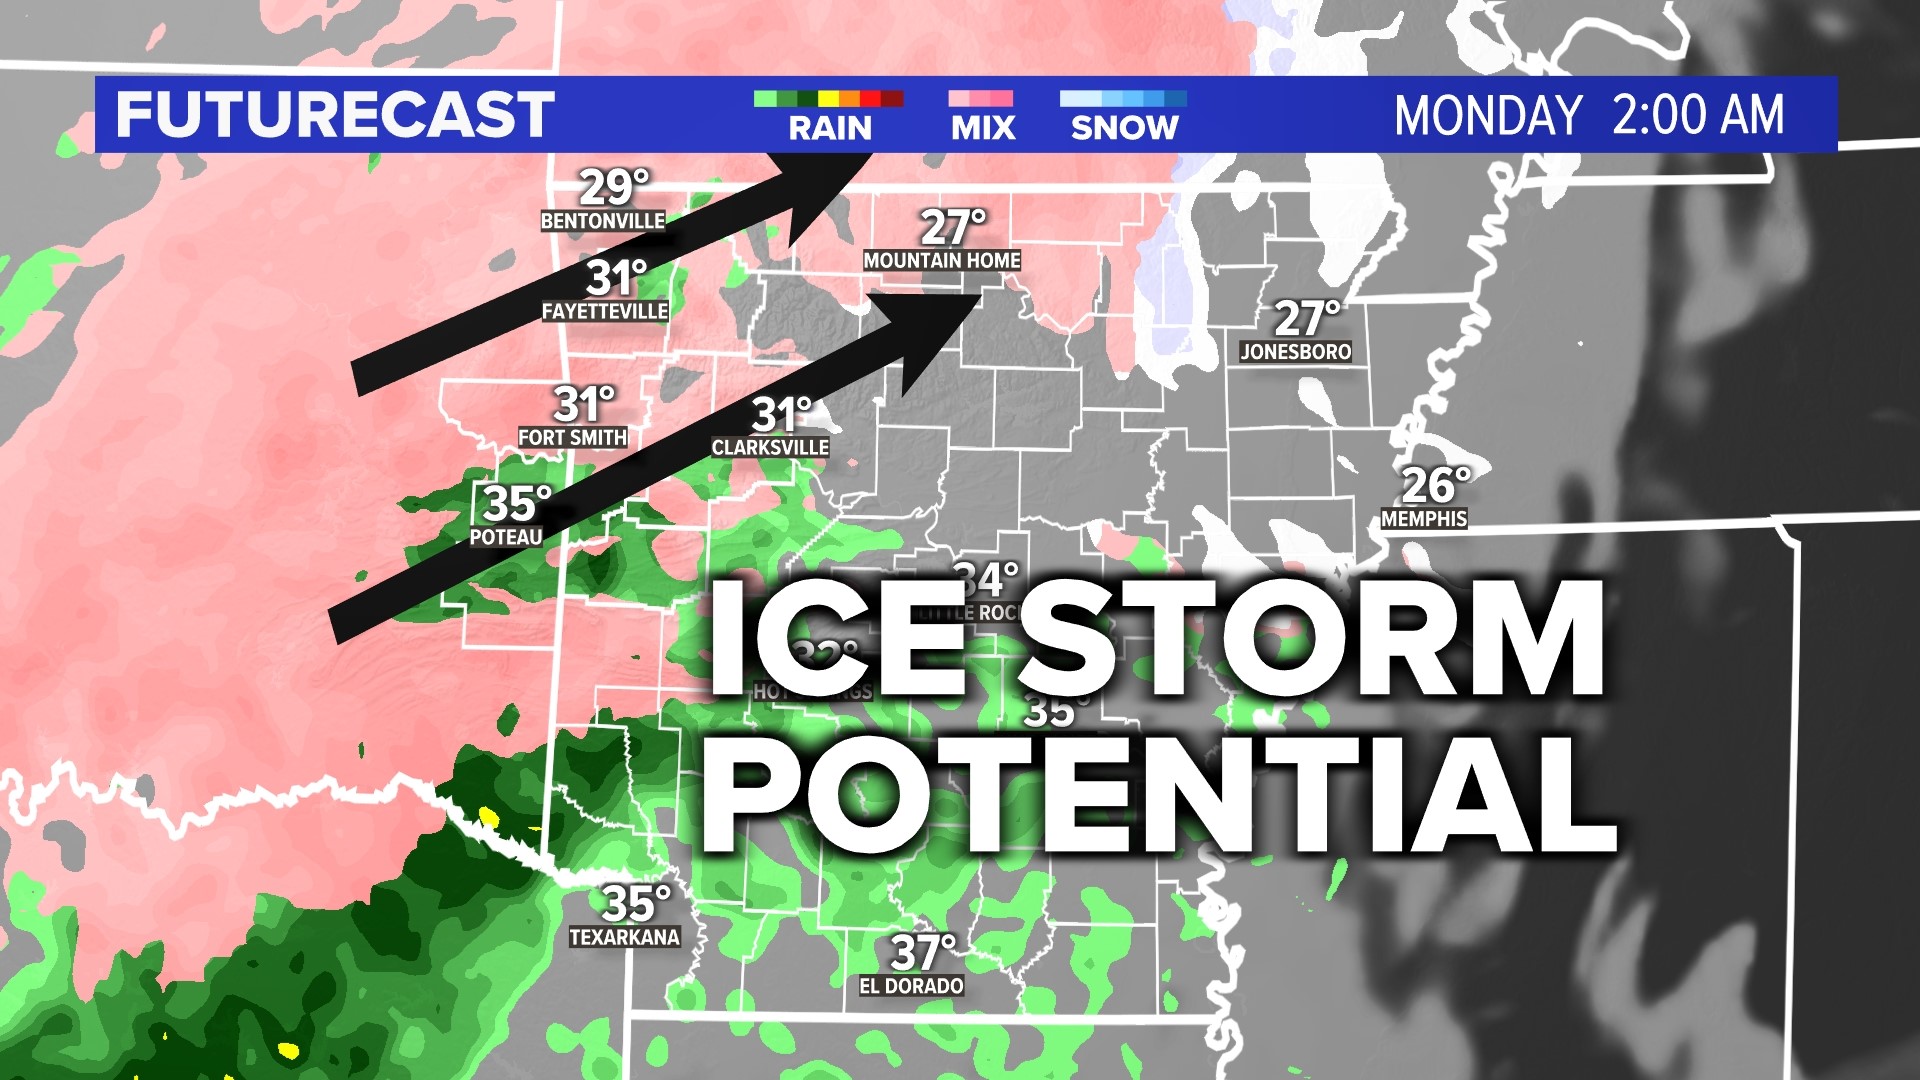 Arkansas is preparing for another wintry system this time bringing Ice